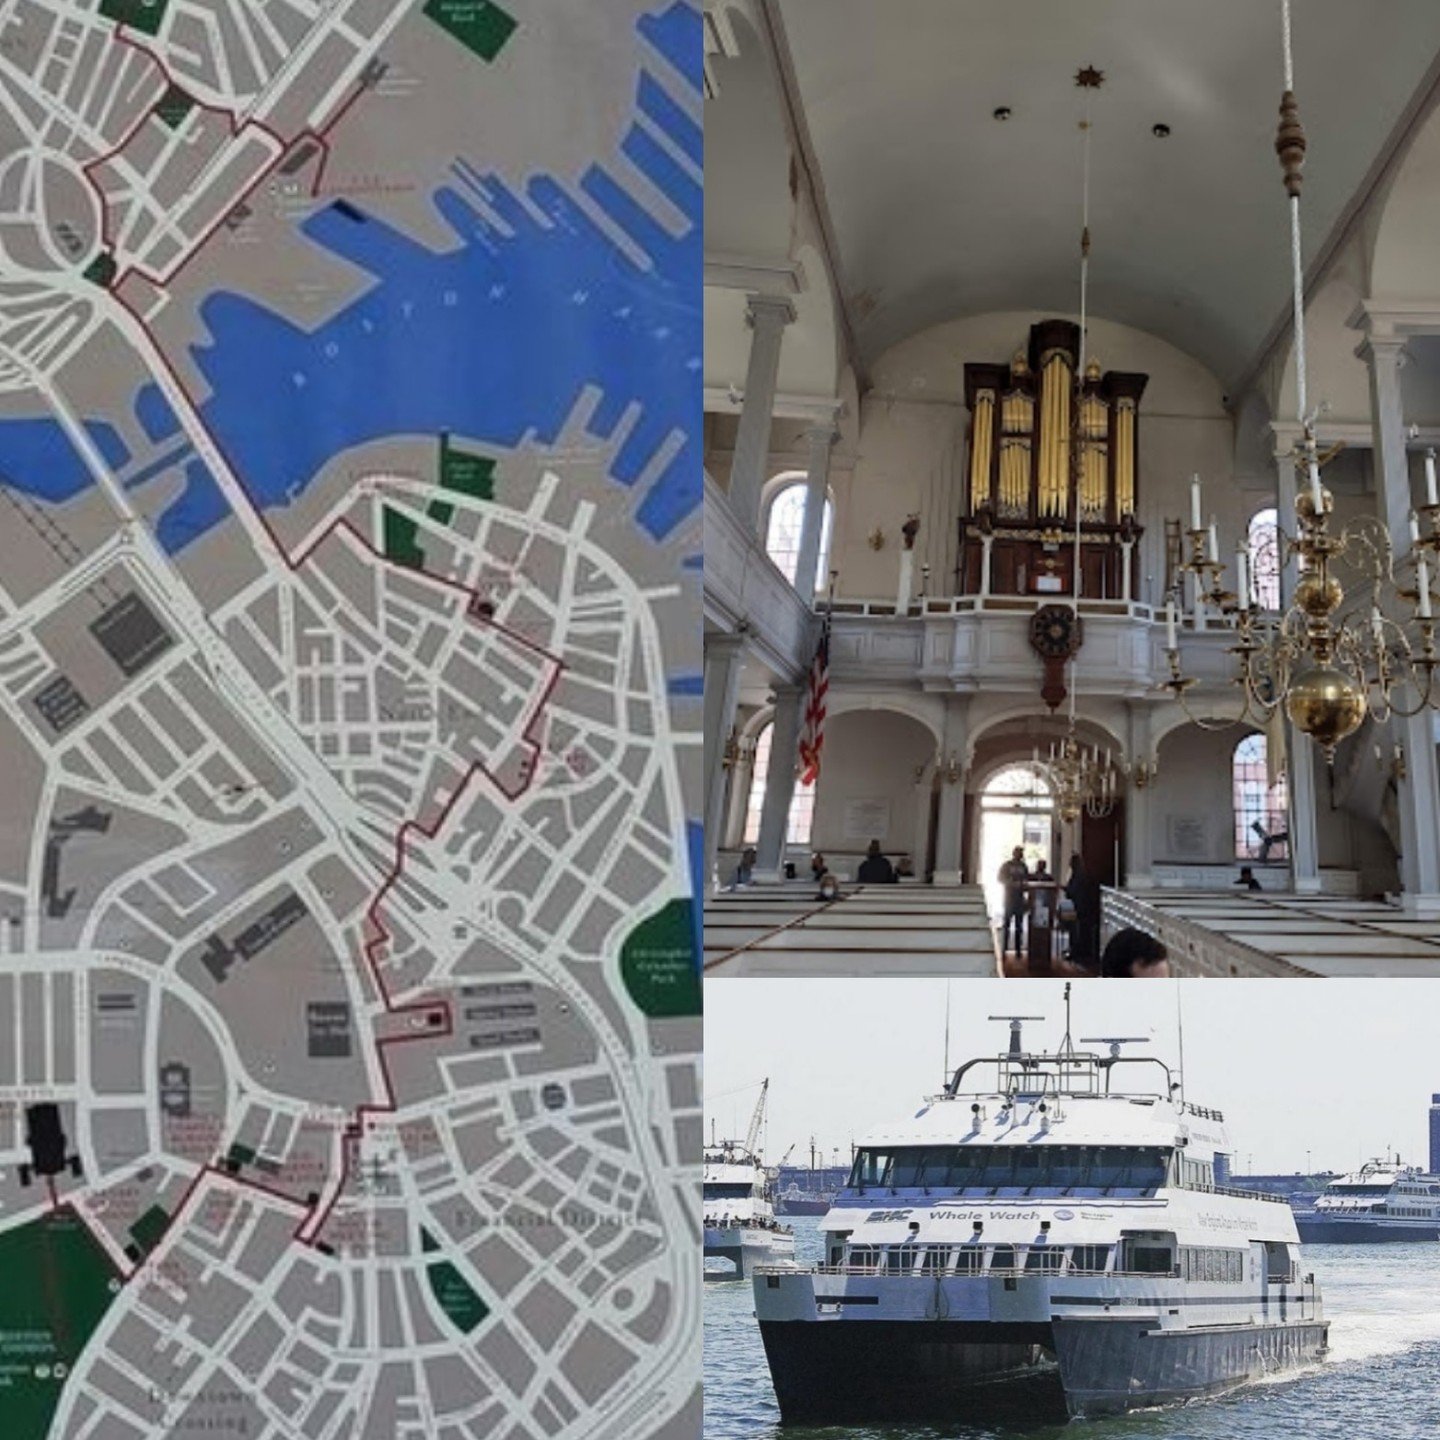 Hull PTO has approved to fund the 5th Grade field trip to Boston via the commuter boat, students will tour and attend a presentation at the Old North Church, all the while walking a portion of the Freedom Trail to see significant historical locations